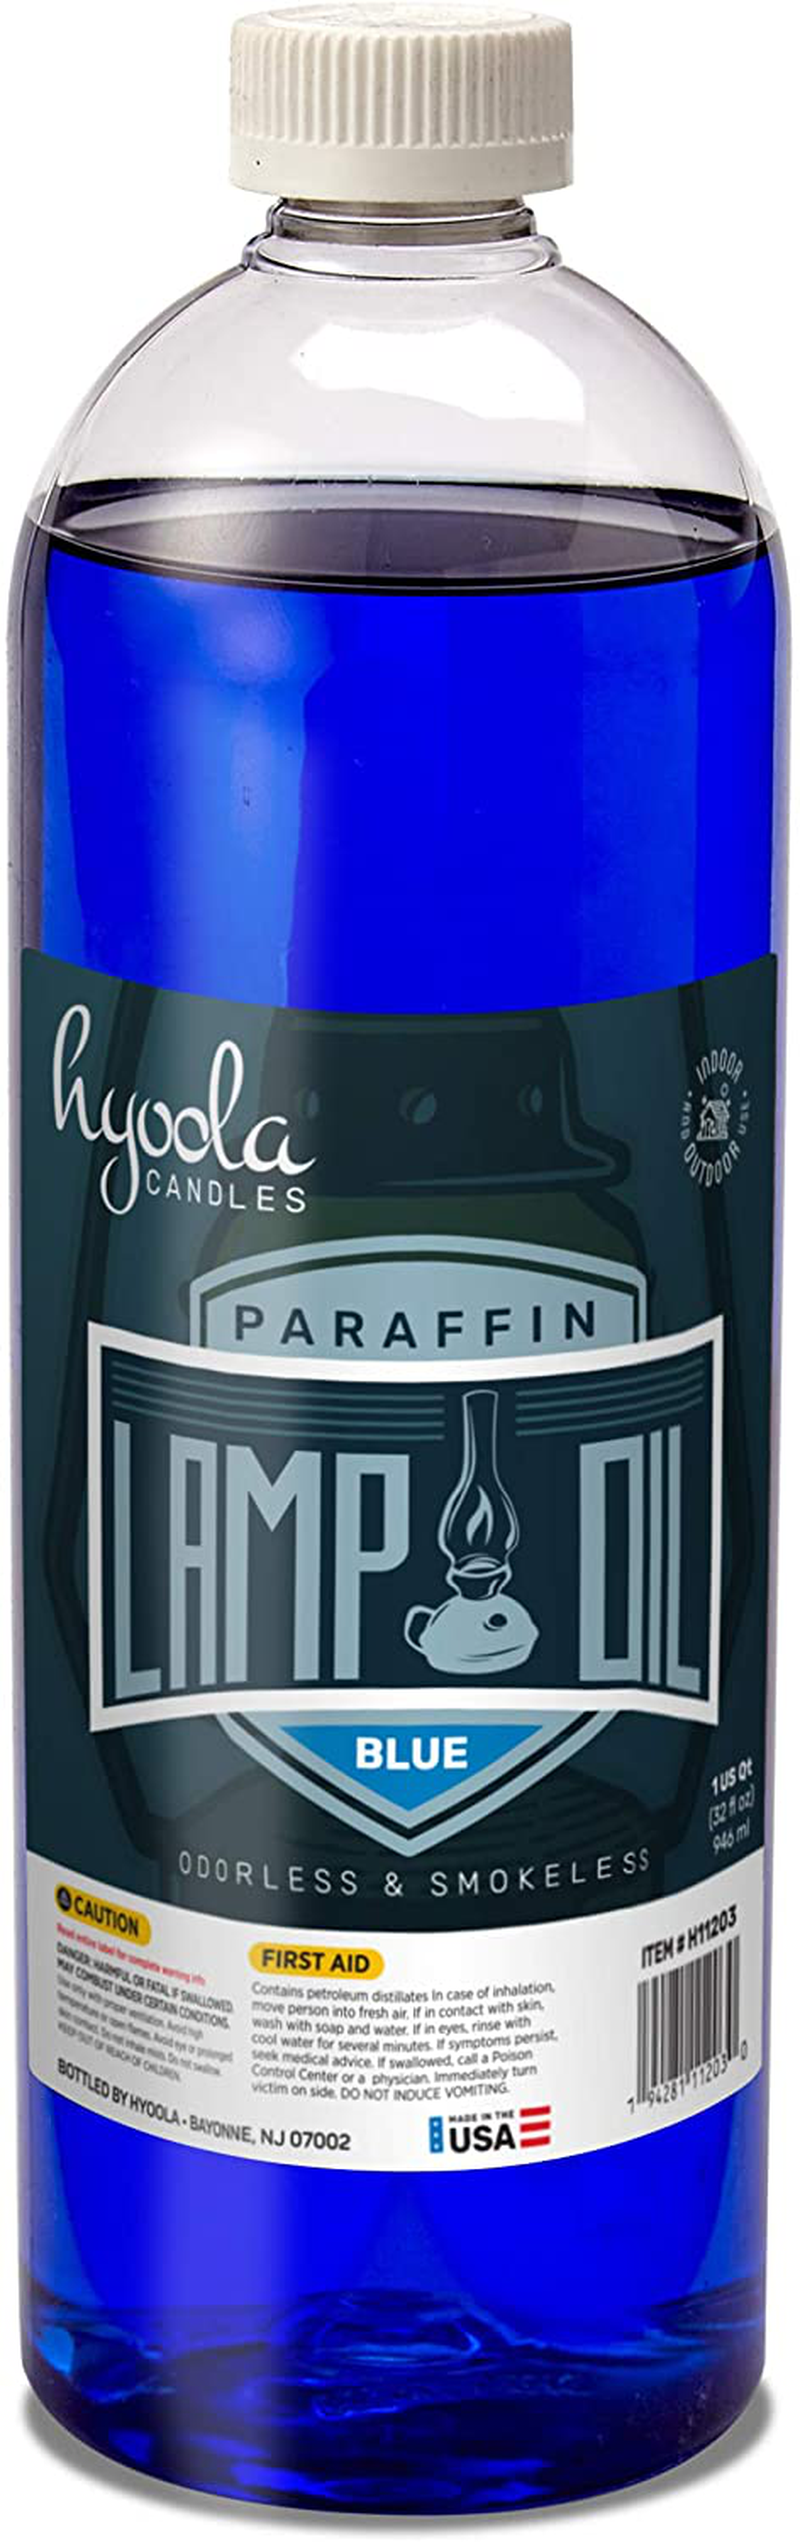 Hyoola Candles Liquid Paraffin Lamp Oil - Blue Smokeless, Odorless, Ultra Clean Burning Fuel for Indoor and Outdoor Use - Highest Purity Available - 32oz Home & Garden > Lighting Accessories > Oil Lamp Fuel Hyoola Default Title  